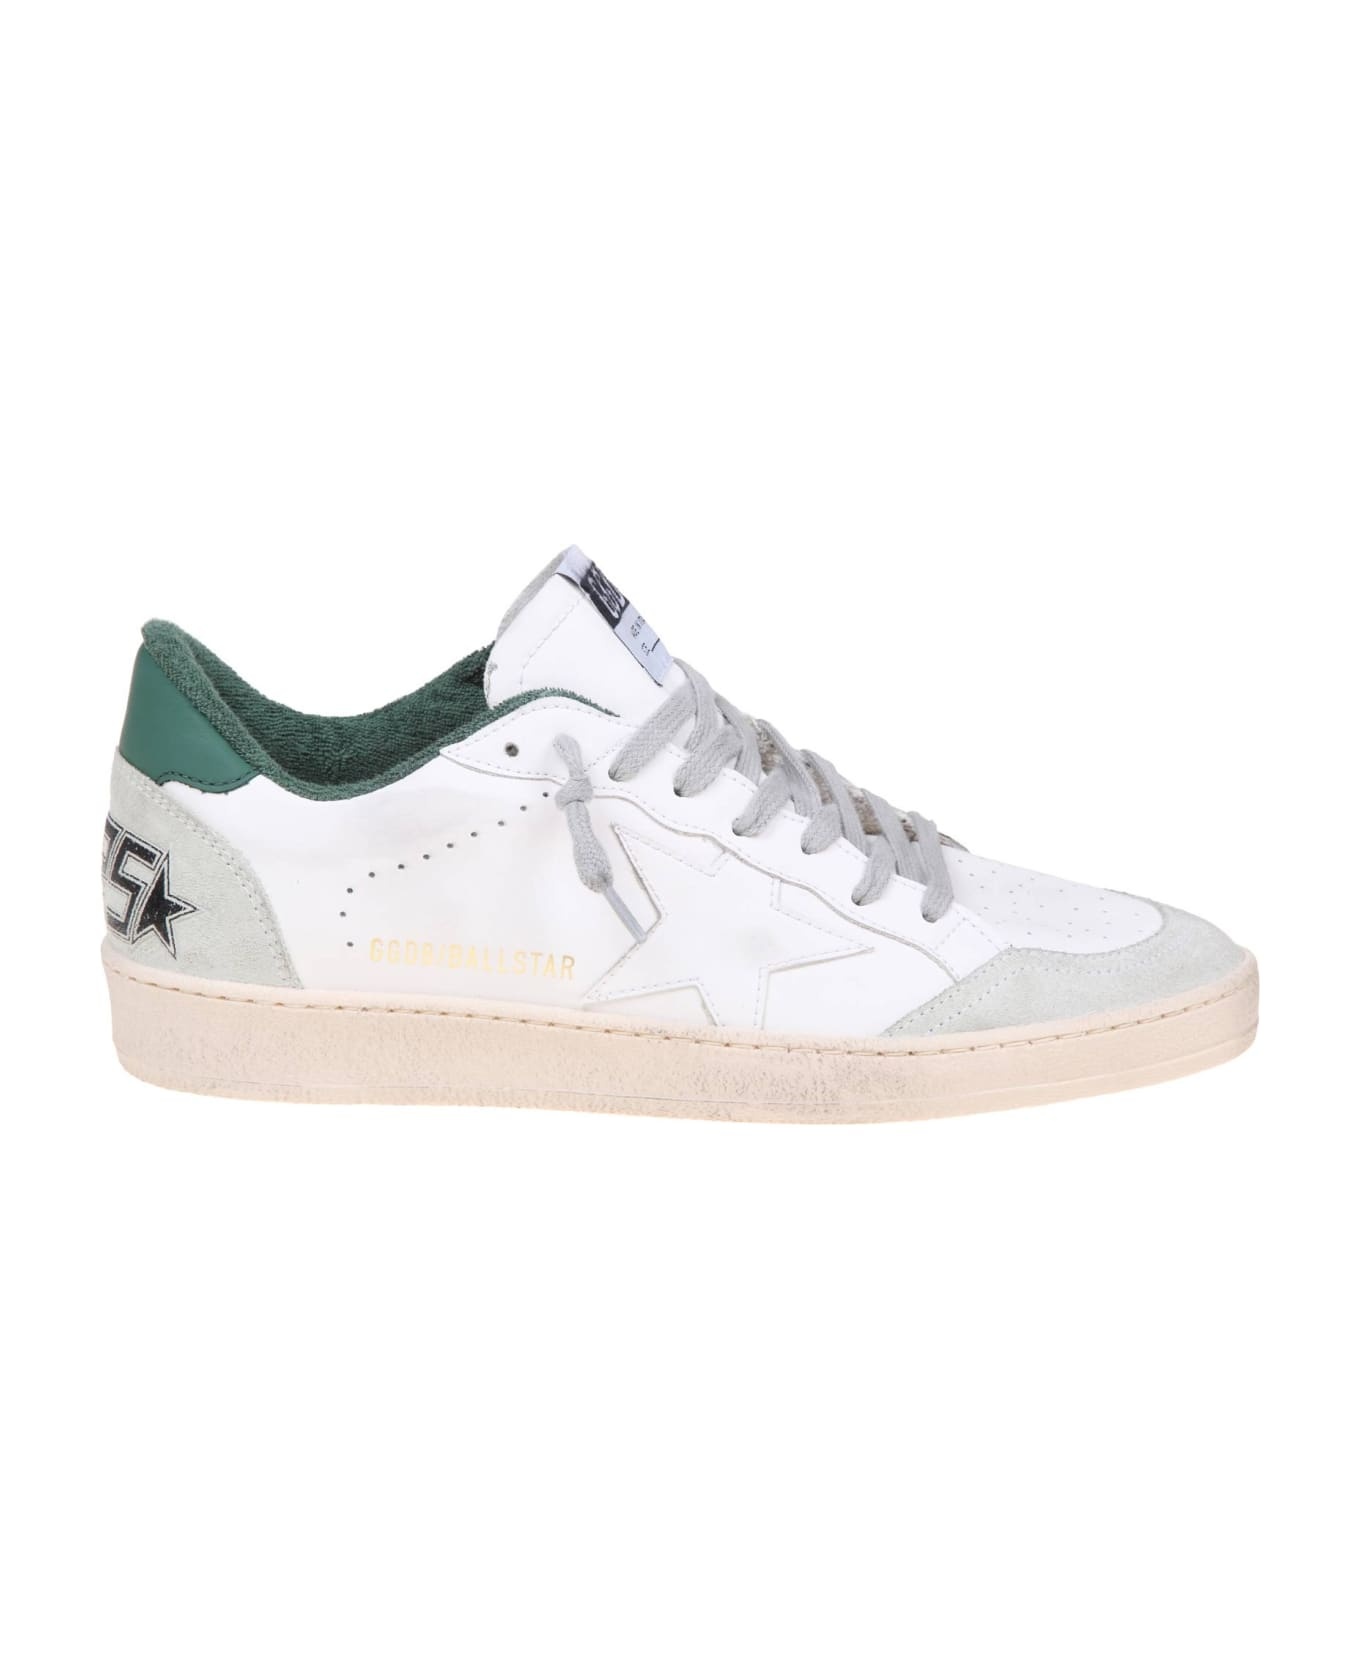 Ball Star Sneakers In White Suede And Leather - 1